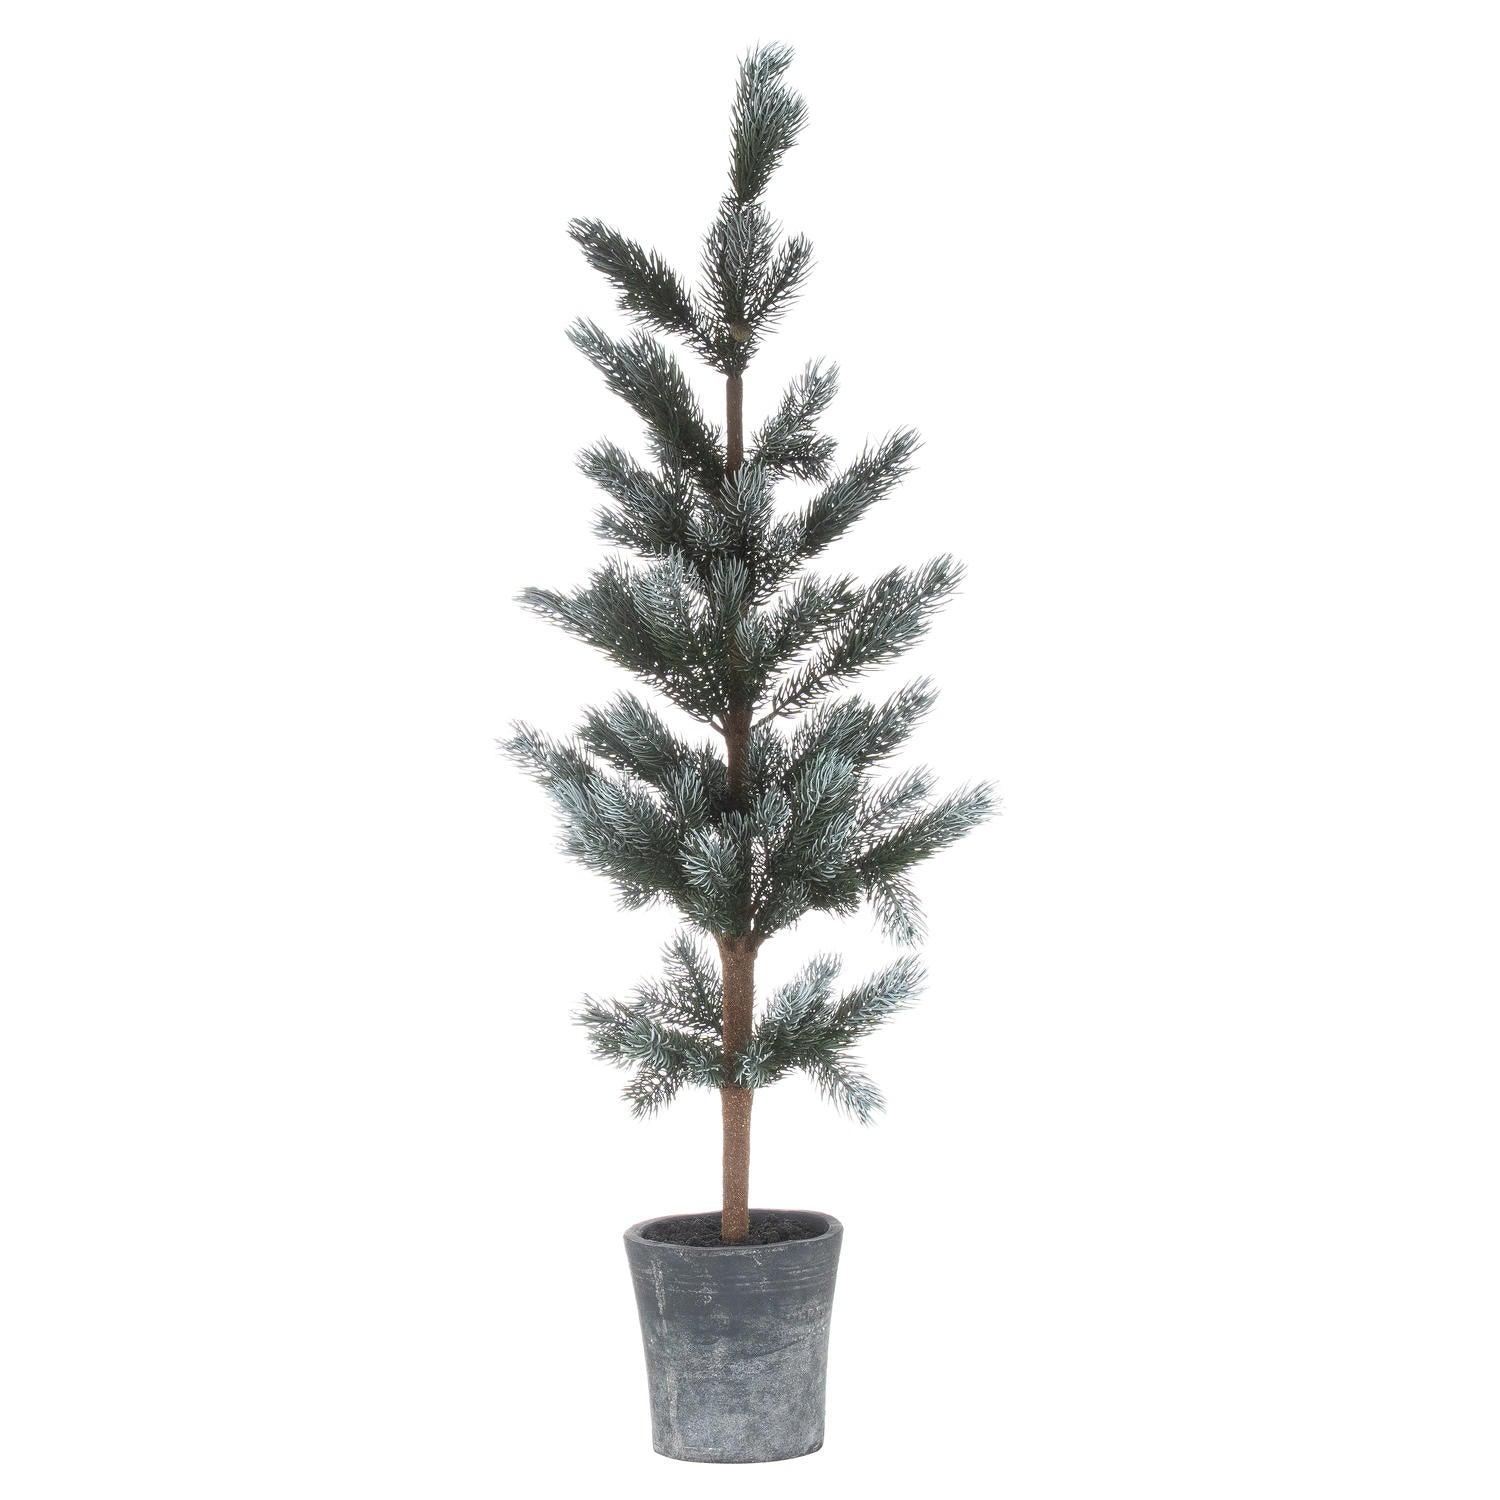 View Christmas Fir Tree In Stone Pot information